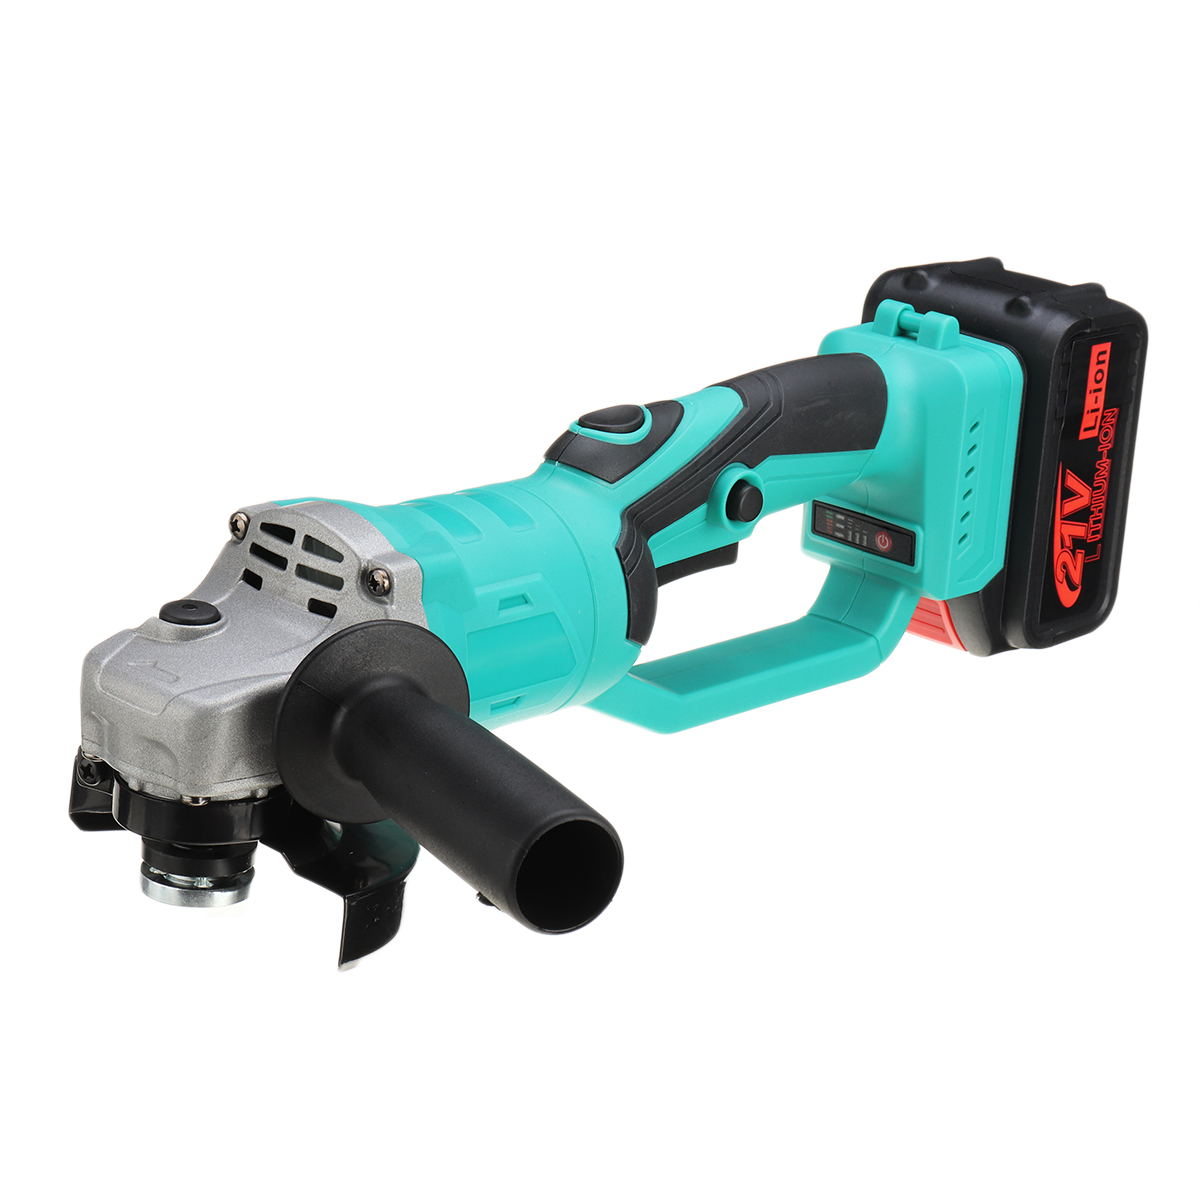 100mm-Cordless-Electric-Angle-Grinder-15000MAH-12-Lithium-Batteries-Brushless-Grinding-Machine-For-P-1882246-2